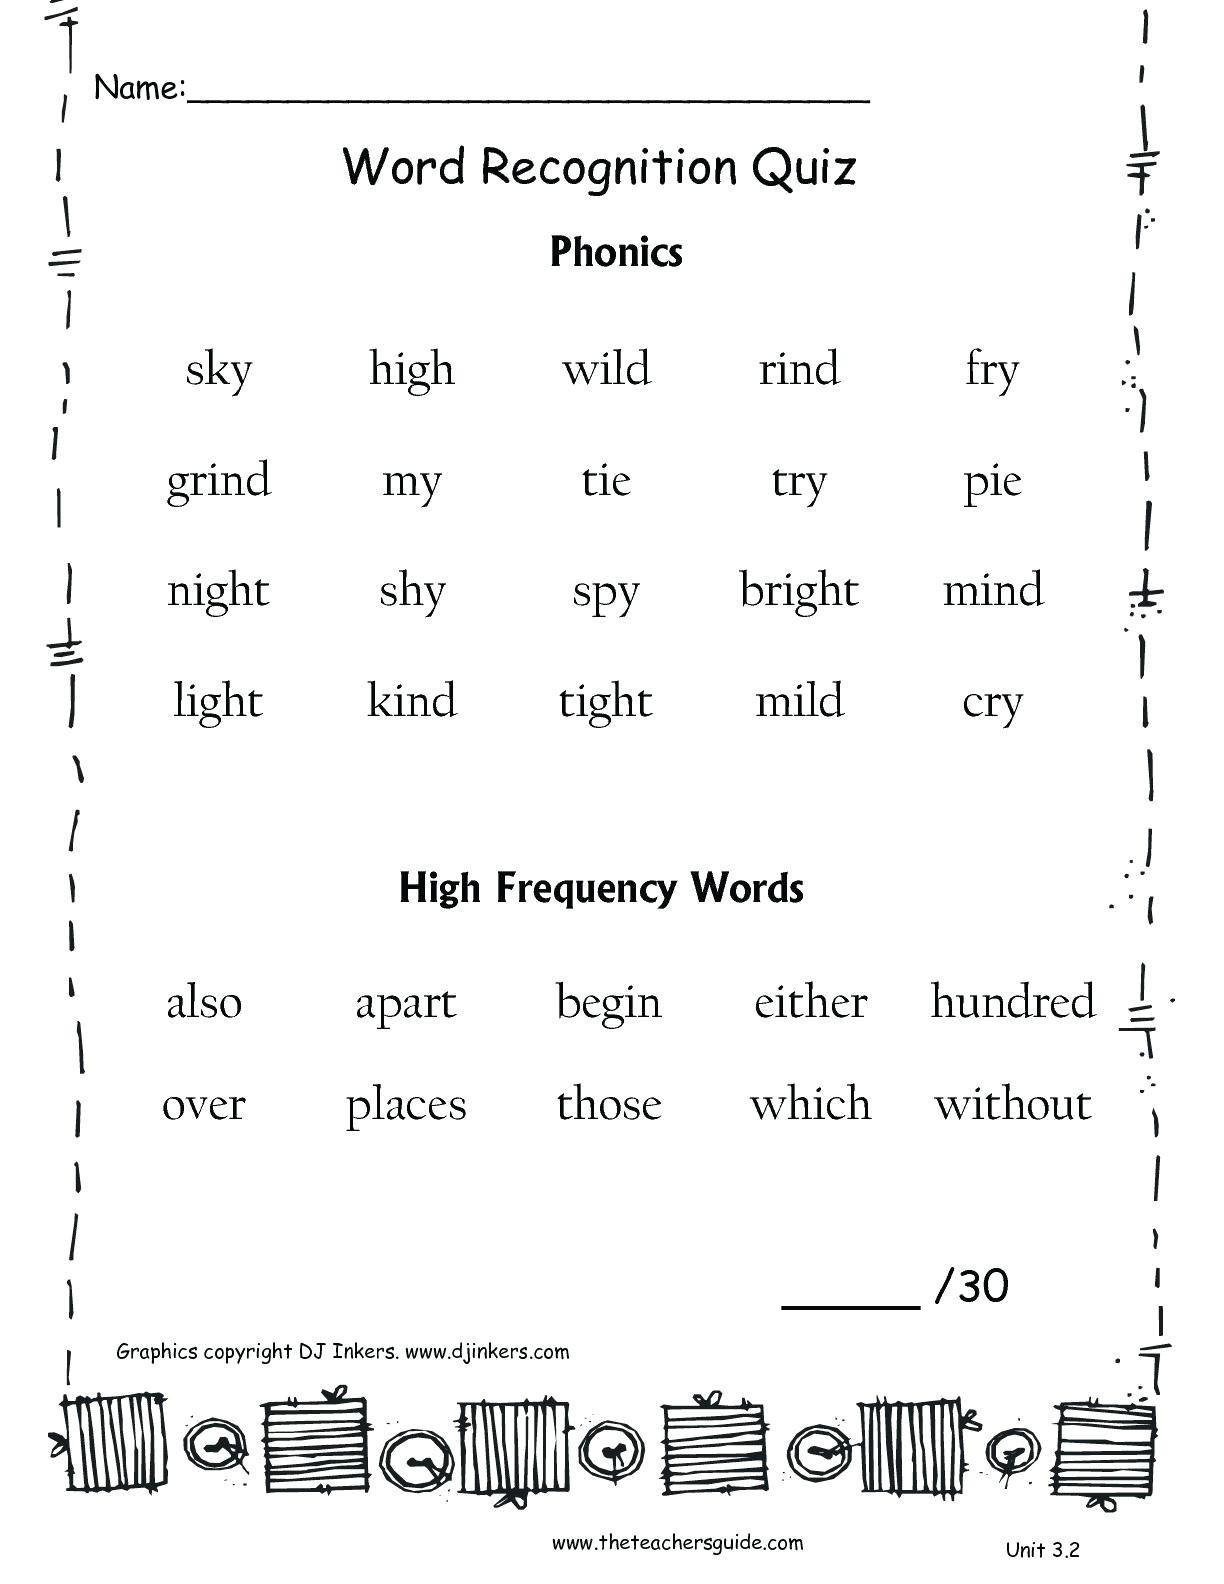 Free Math Worksheets First Grade 1 Addition Add 2 Digit 1 Digit Numbers Missing Addend No Regrouping